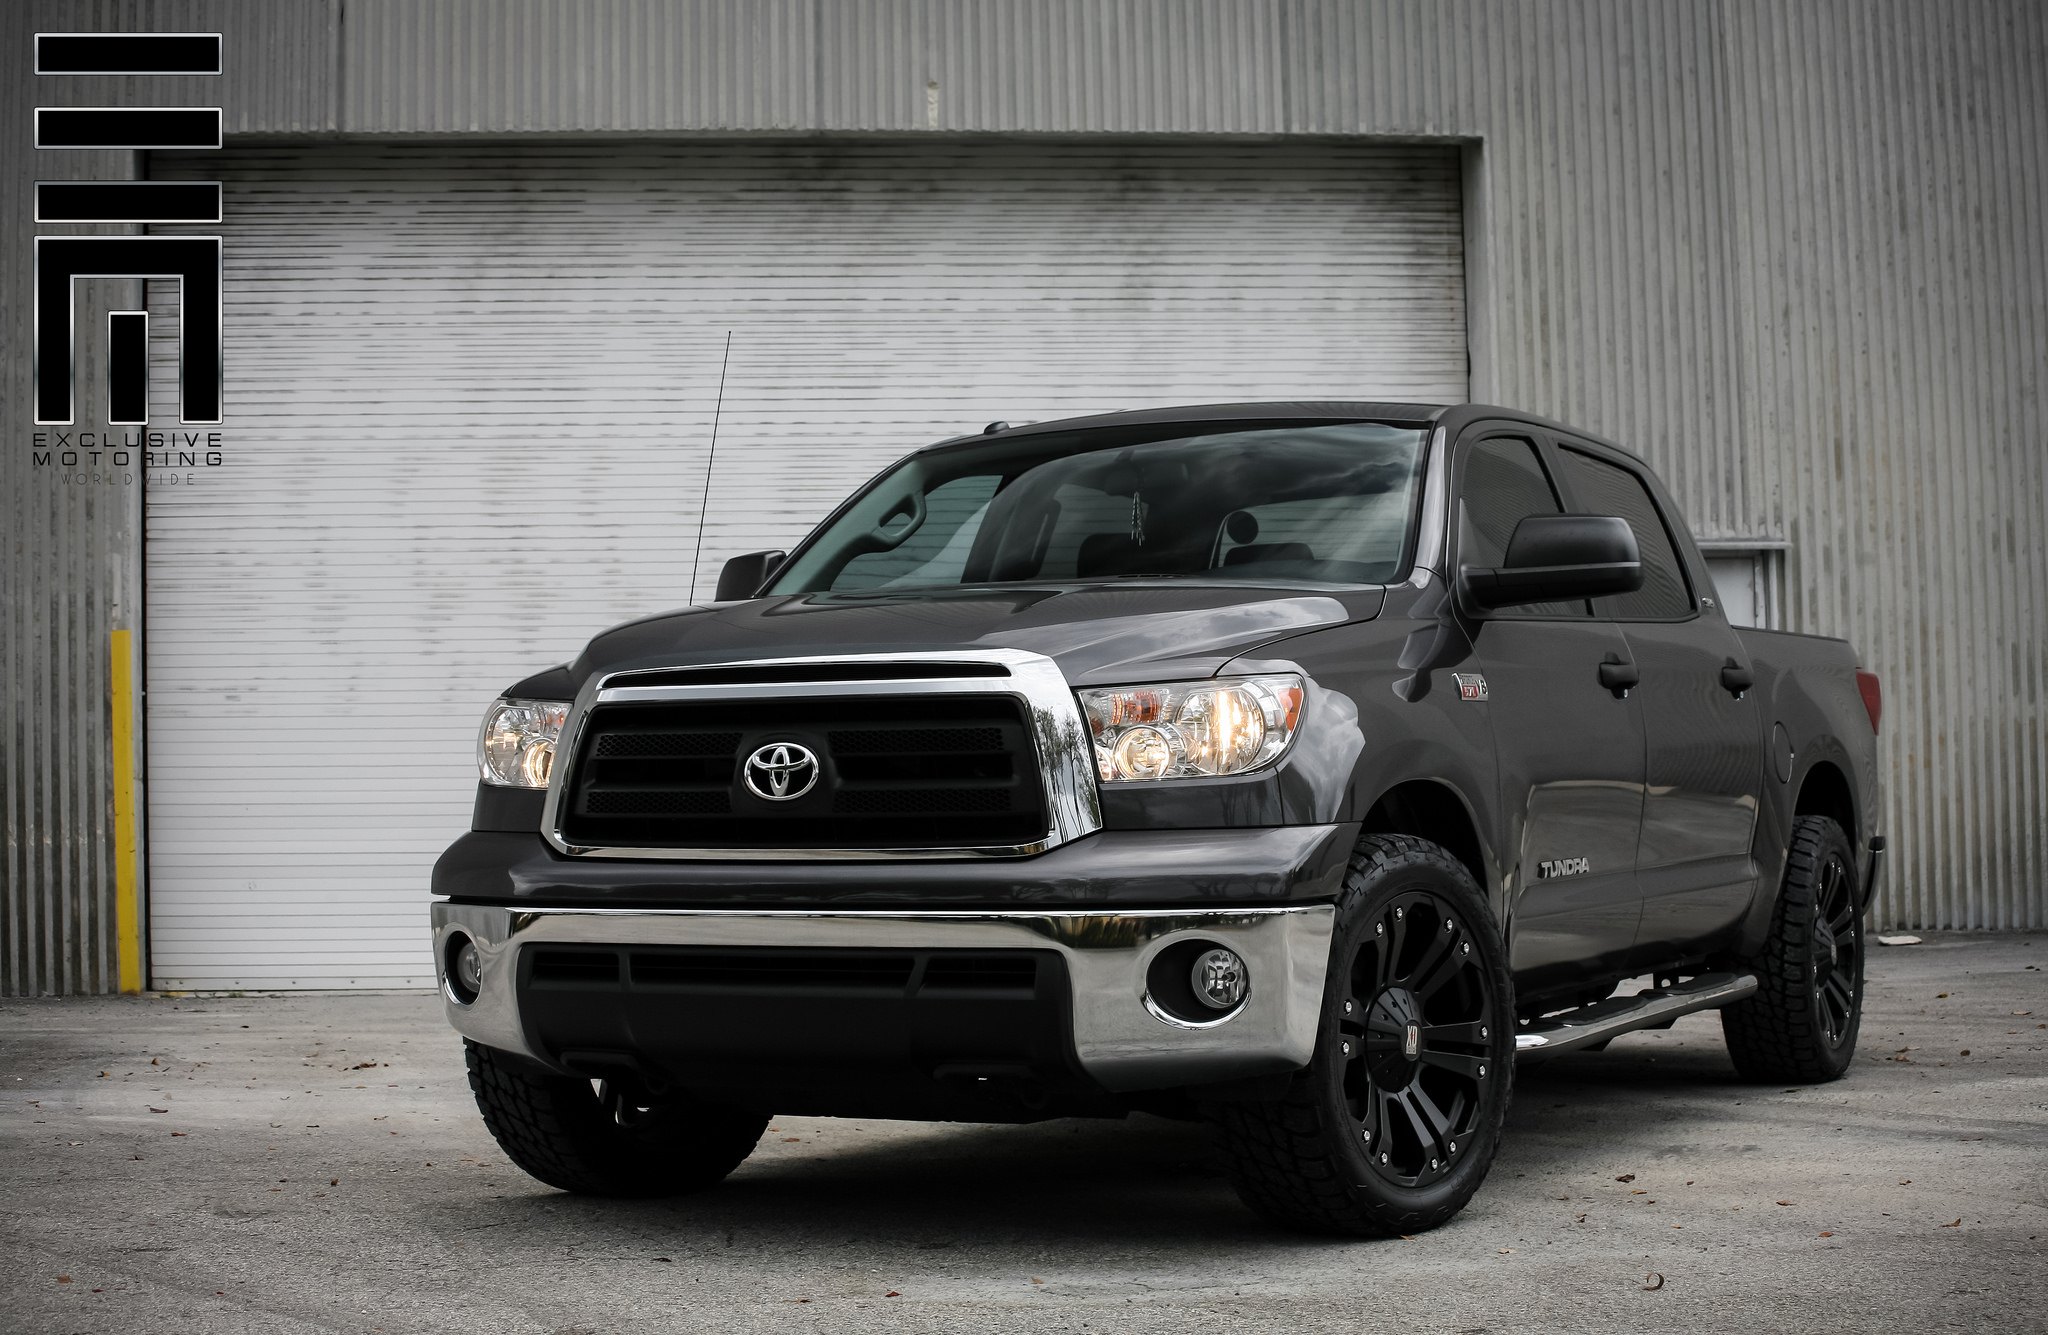 Toyota Tundra on Black XD Off-Road Rims - Photo by Exclusive Motoring